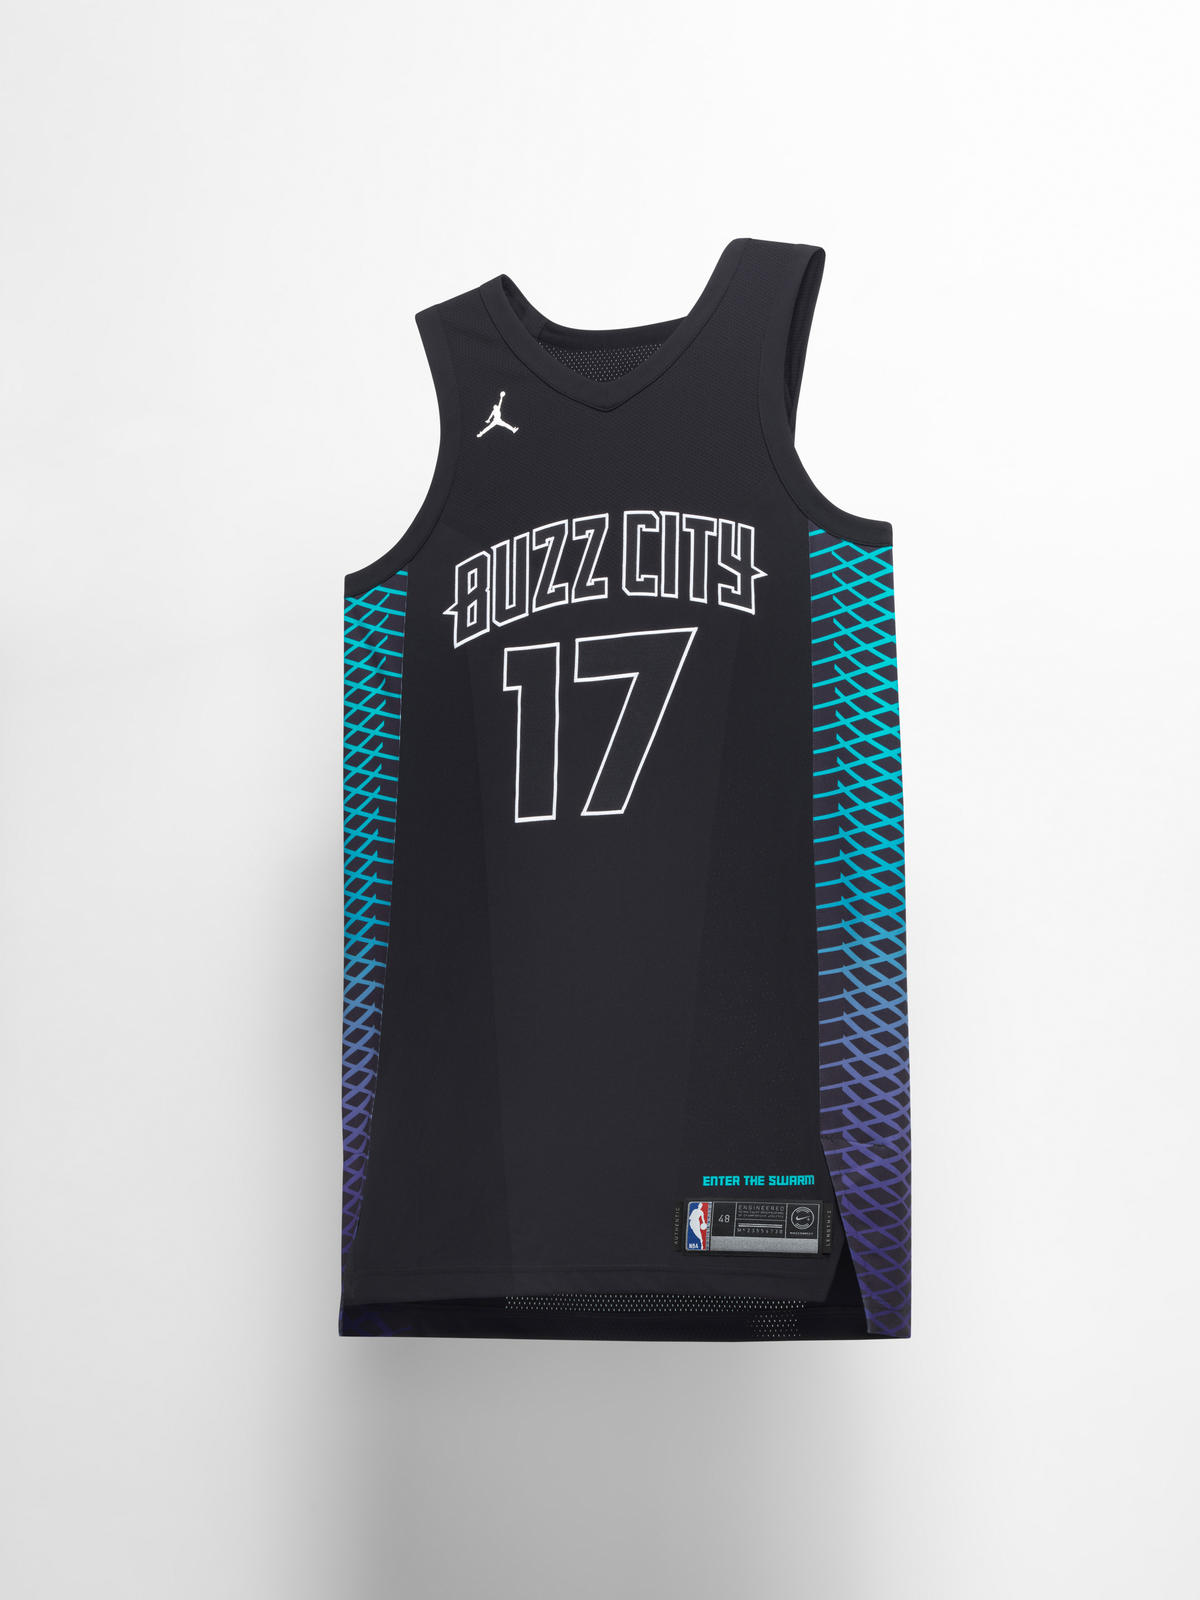 Ranking NBA City Edition jerseys from the awful to the elite - Page 2